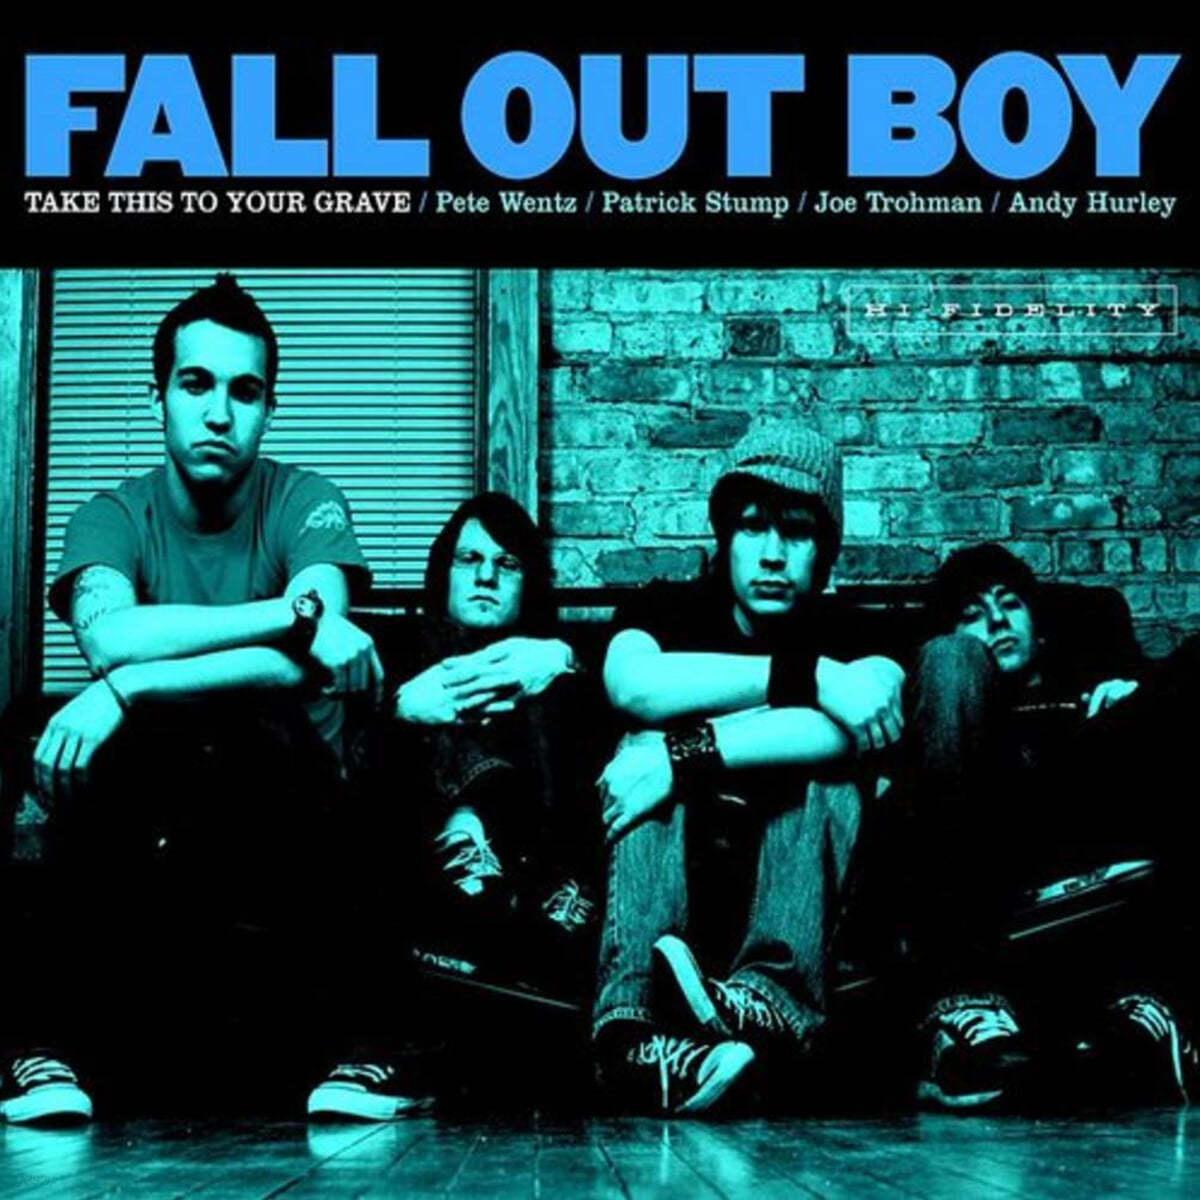 Fall Out Boy (폴 아웃 보이) - Take This to Your Grave [실버 컬러 LP]